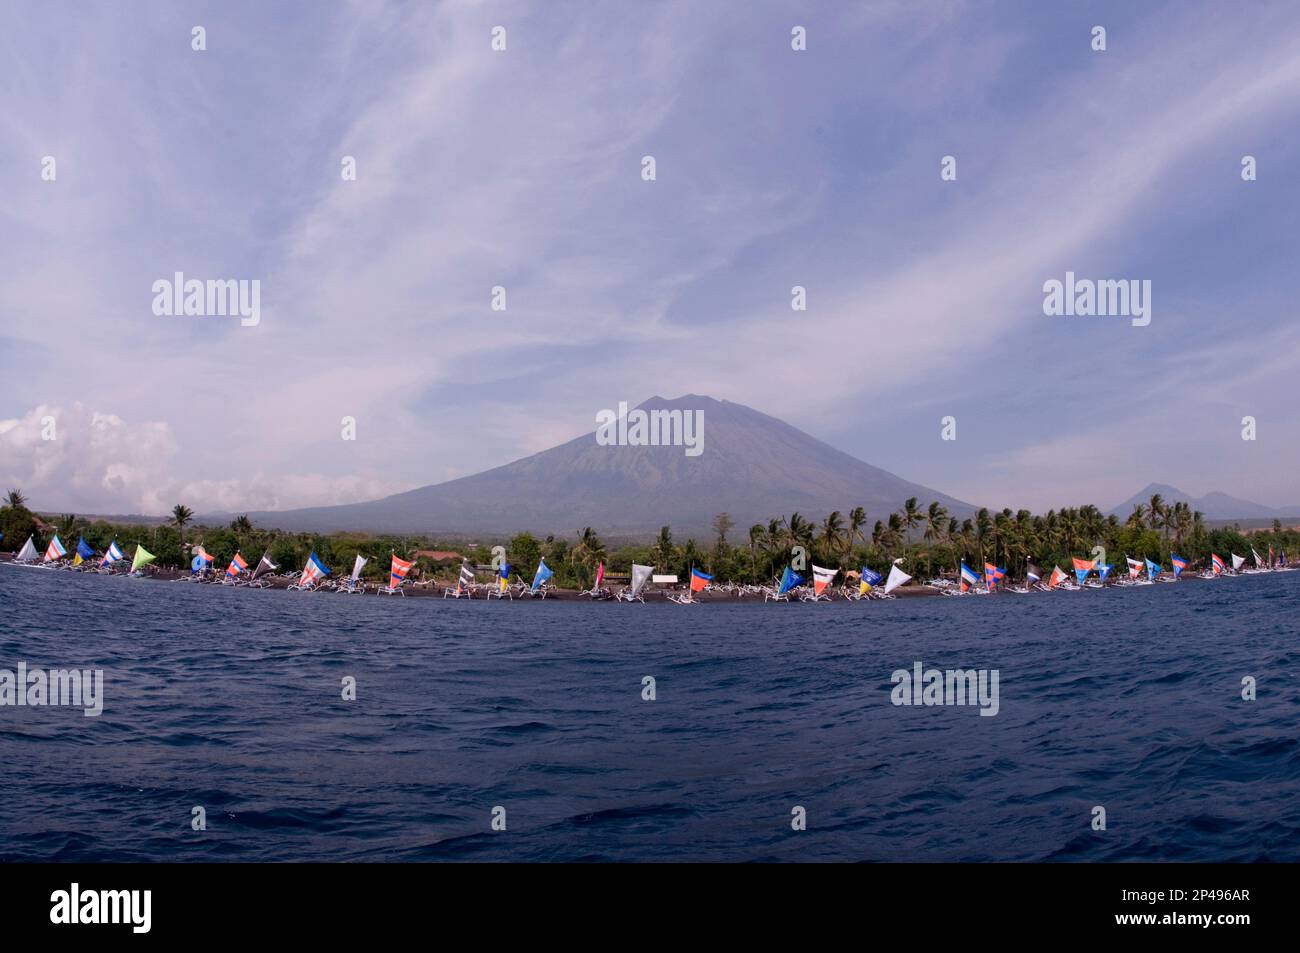 Boats on beach with colorful sails prior to Jukung Race, Tulamben, Bali, Indonesia Stock Photo